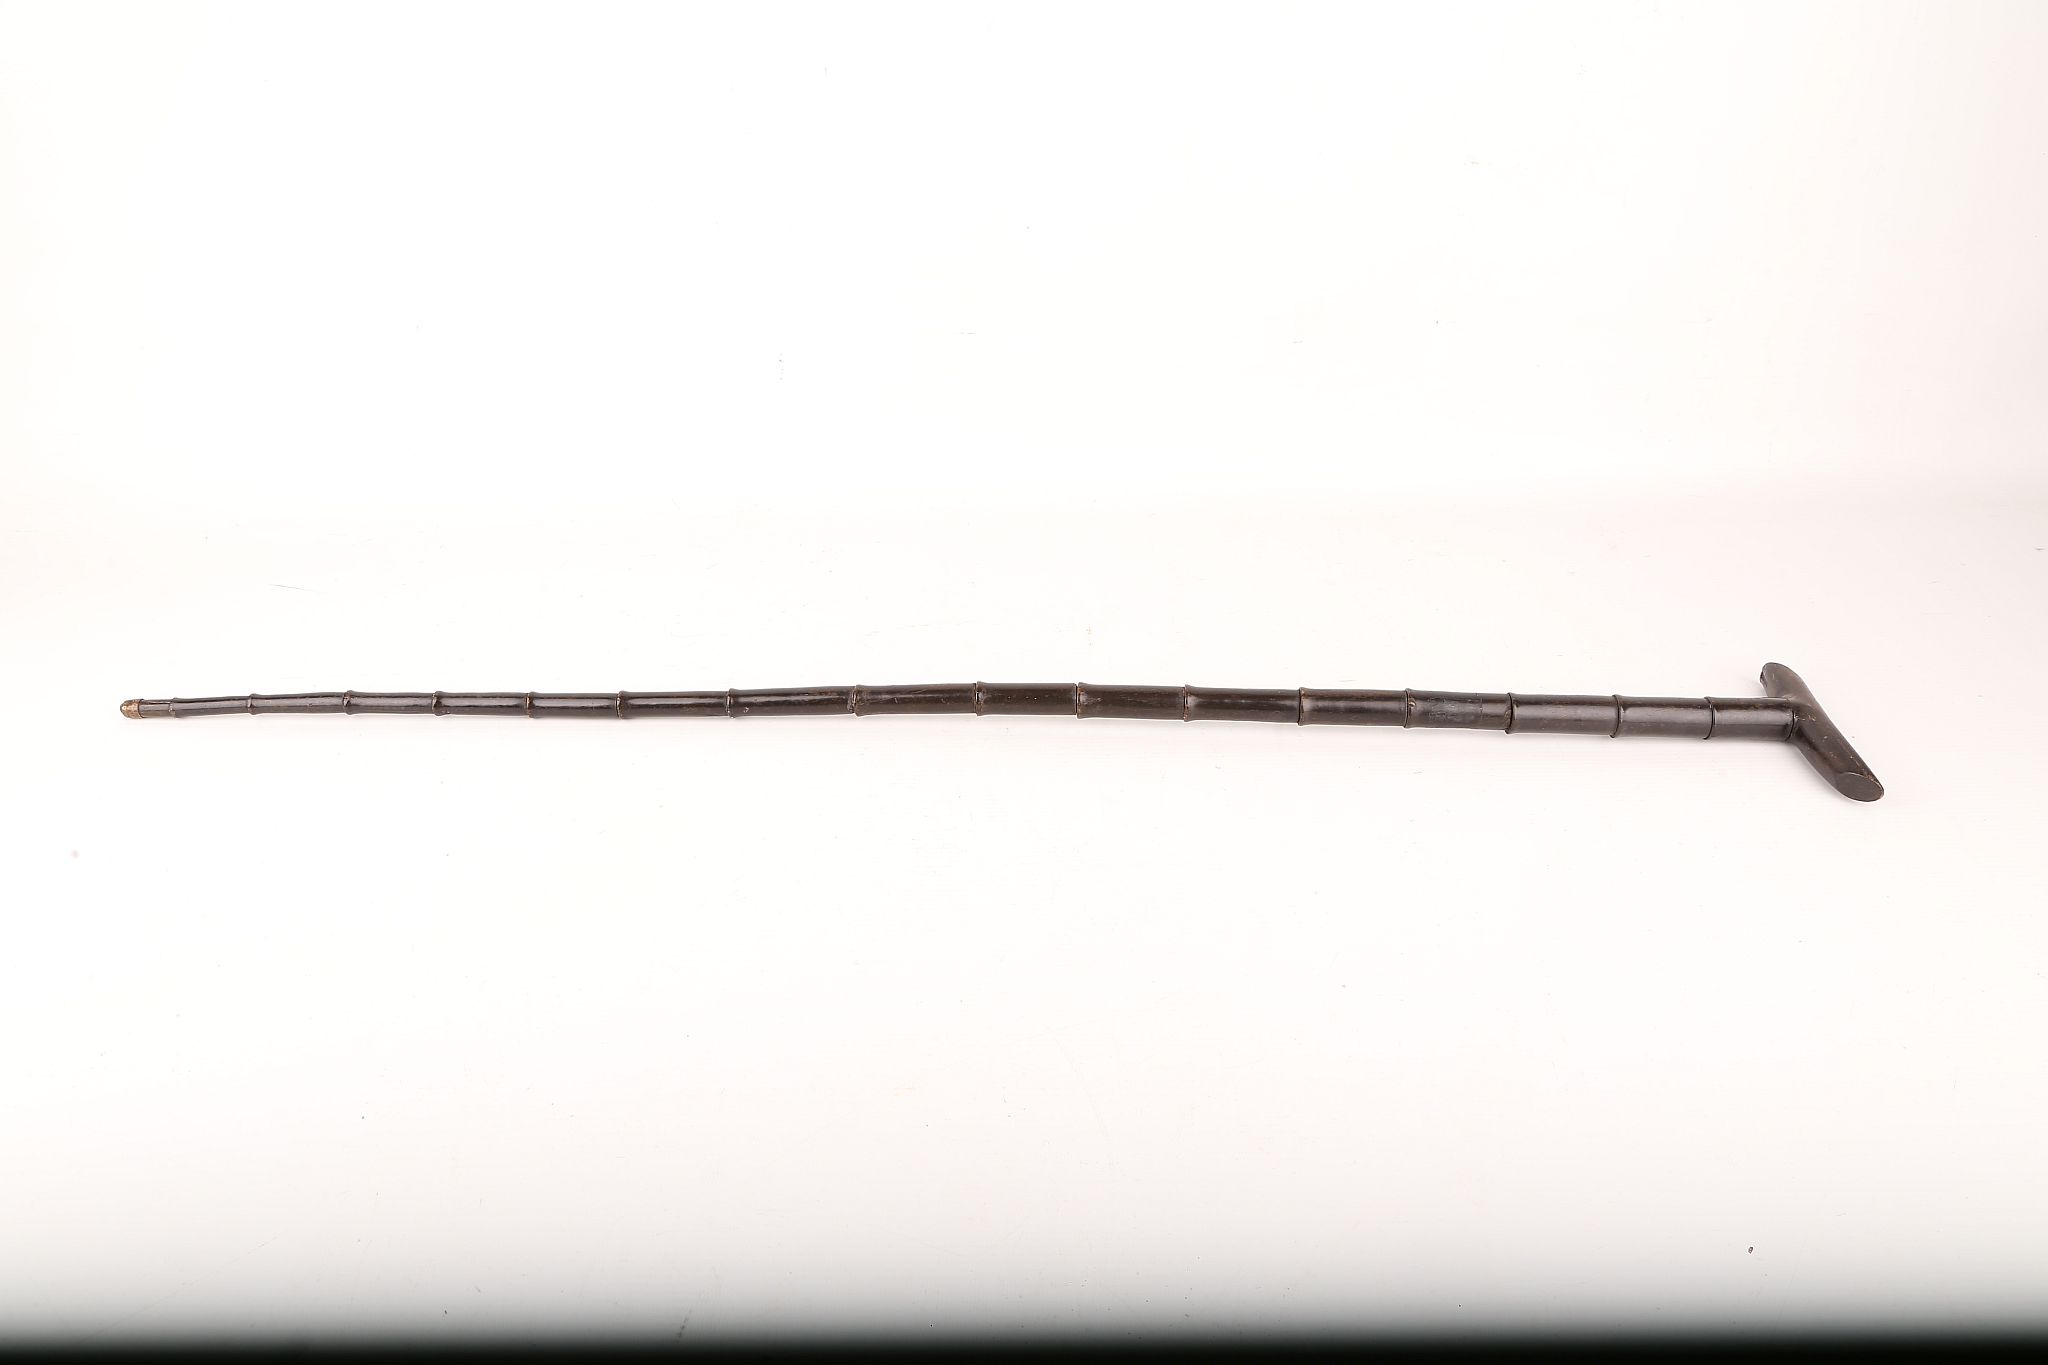 A HORN SECTIONAL TAU SHAPED HANDLED CANE, 85cm. - Image 6 of 6